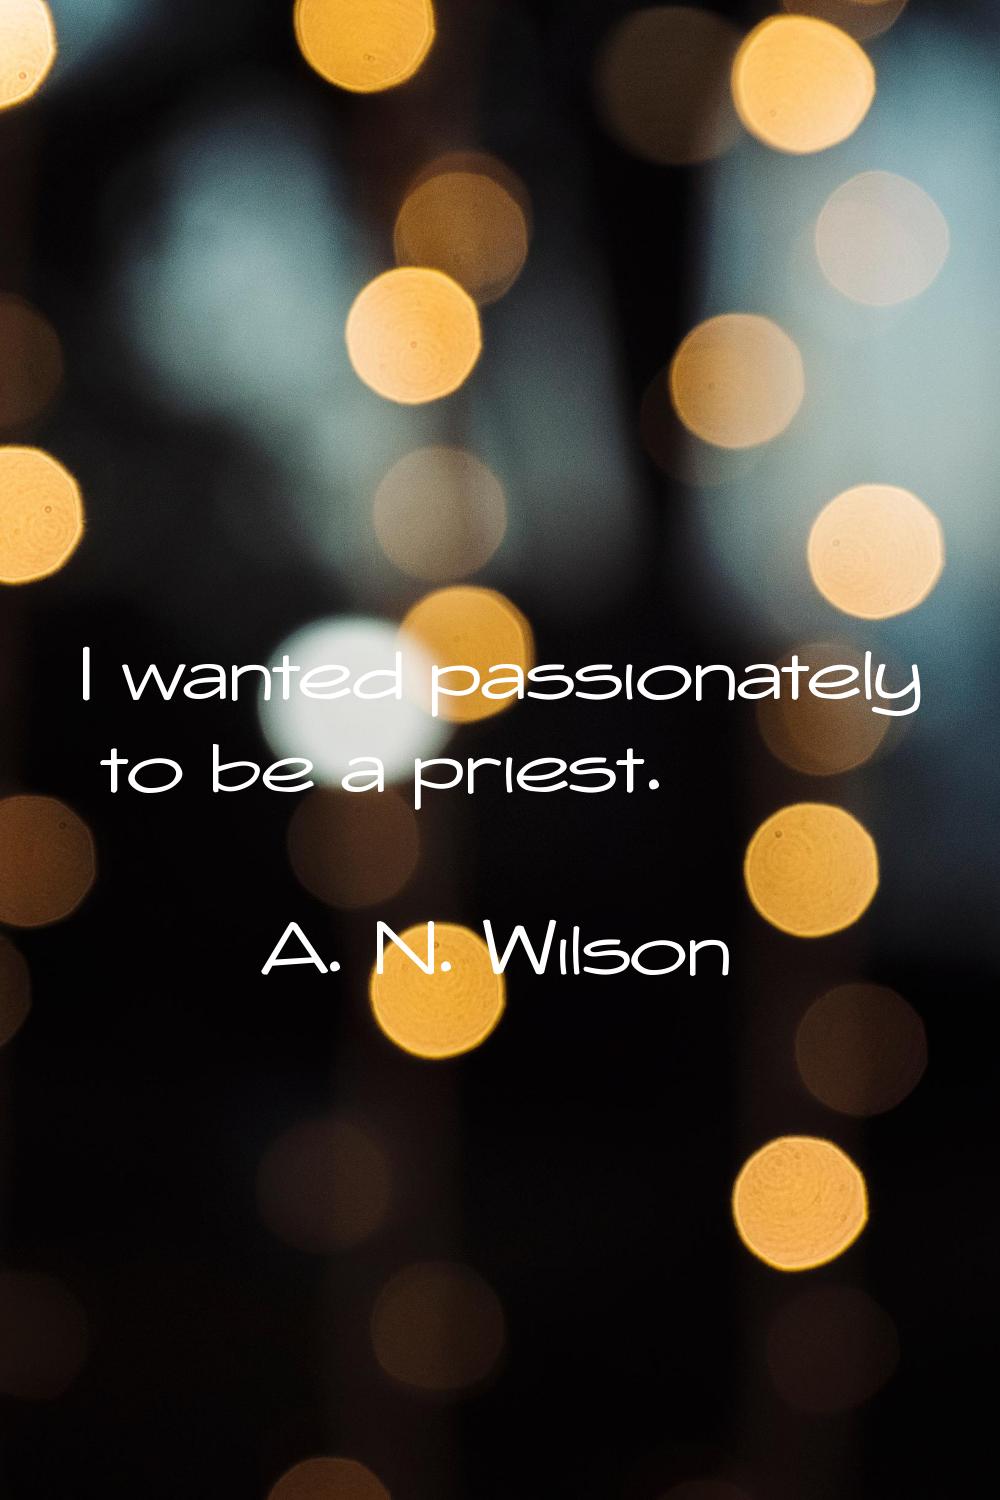 I wanted passionately to be a priest.